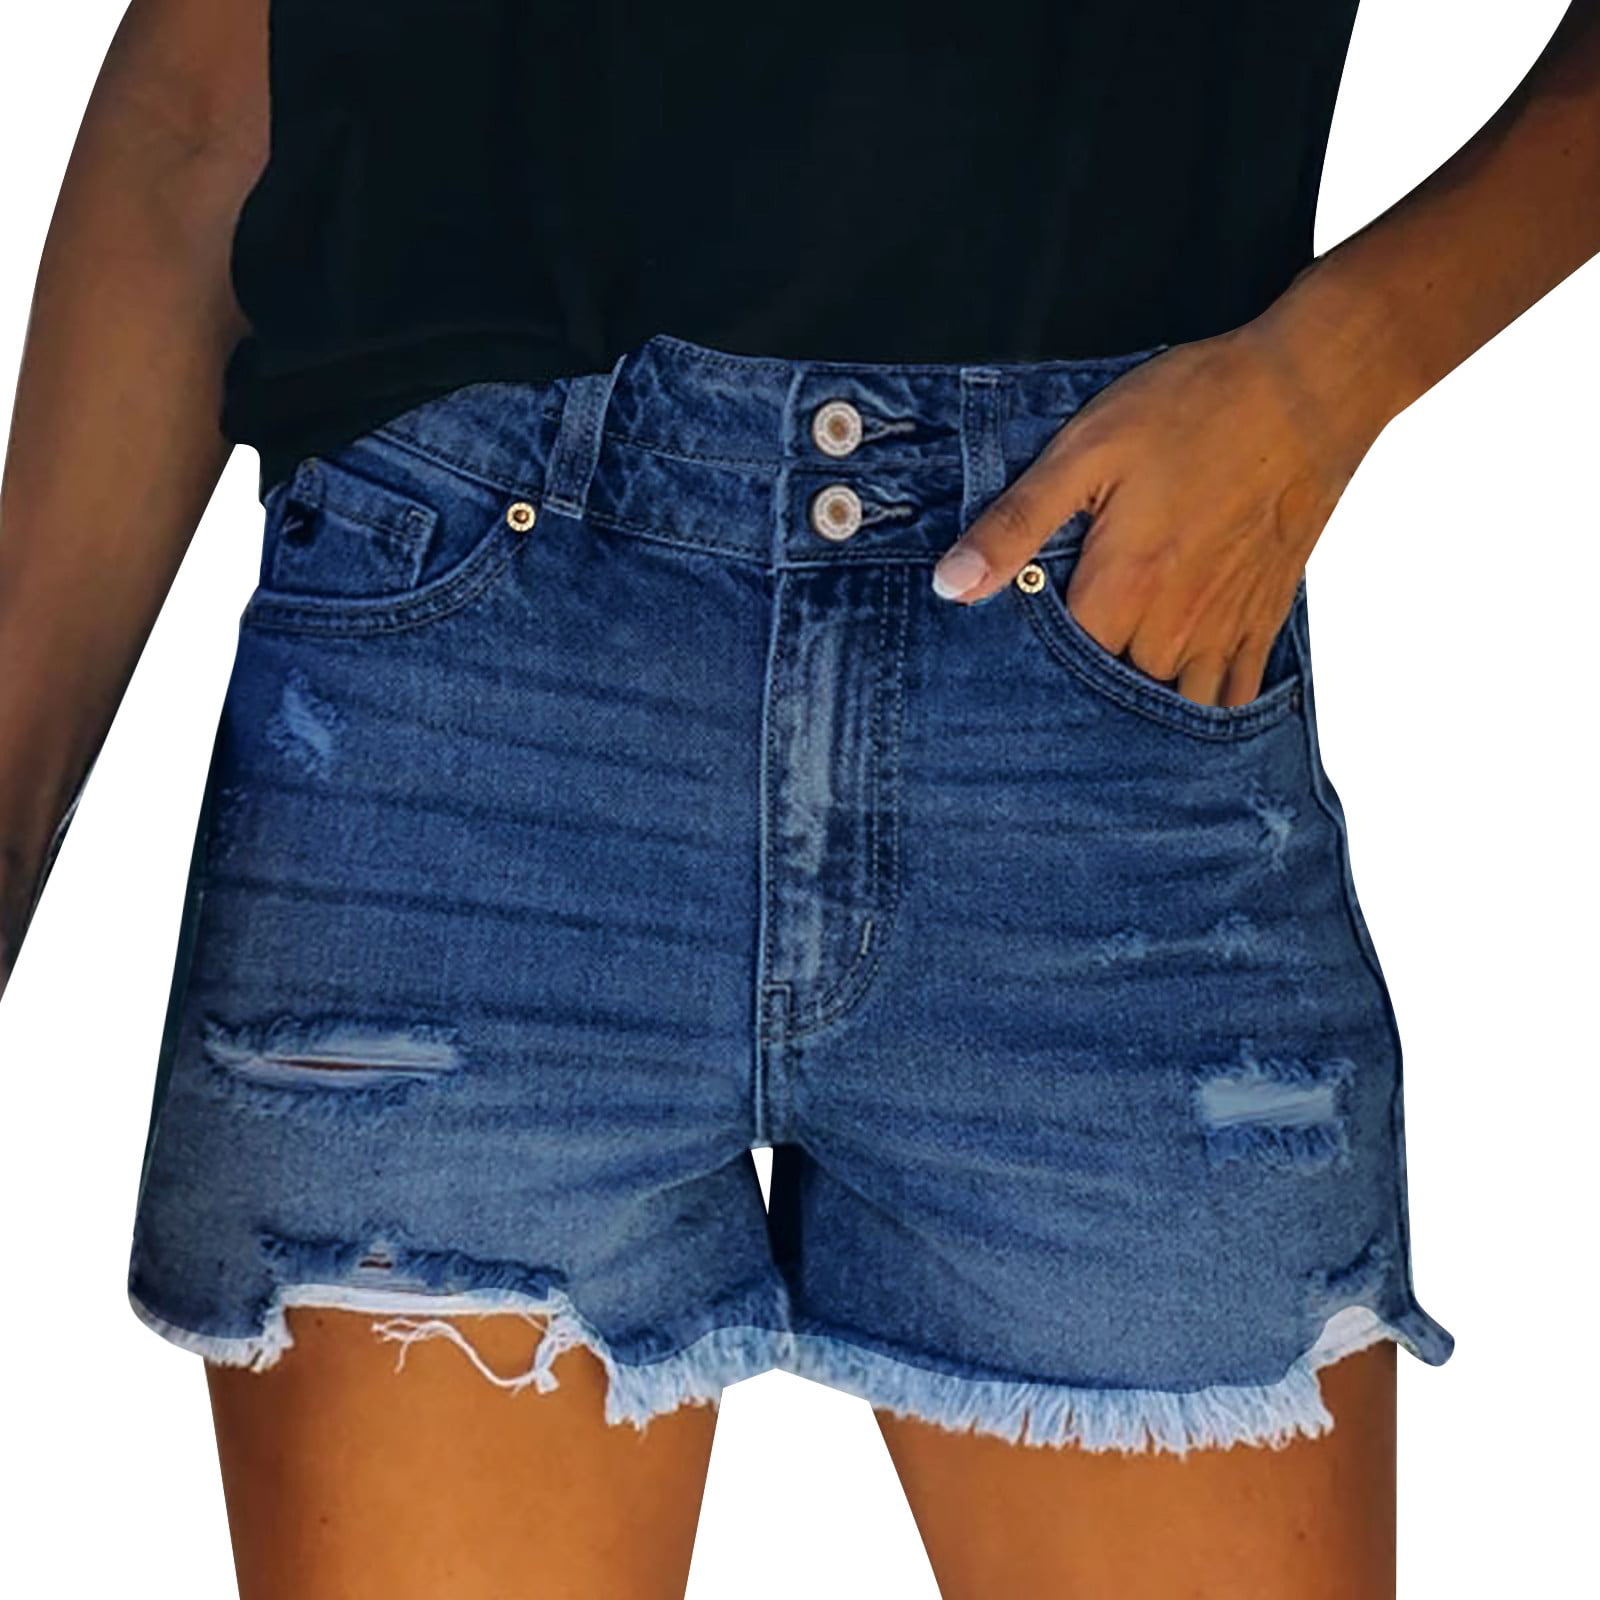 Quealent Women Mid Rise Ripped Stretchy Jeans Shorts Frayed Raw Hem ...